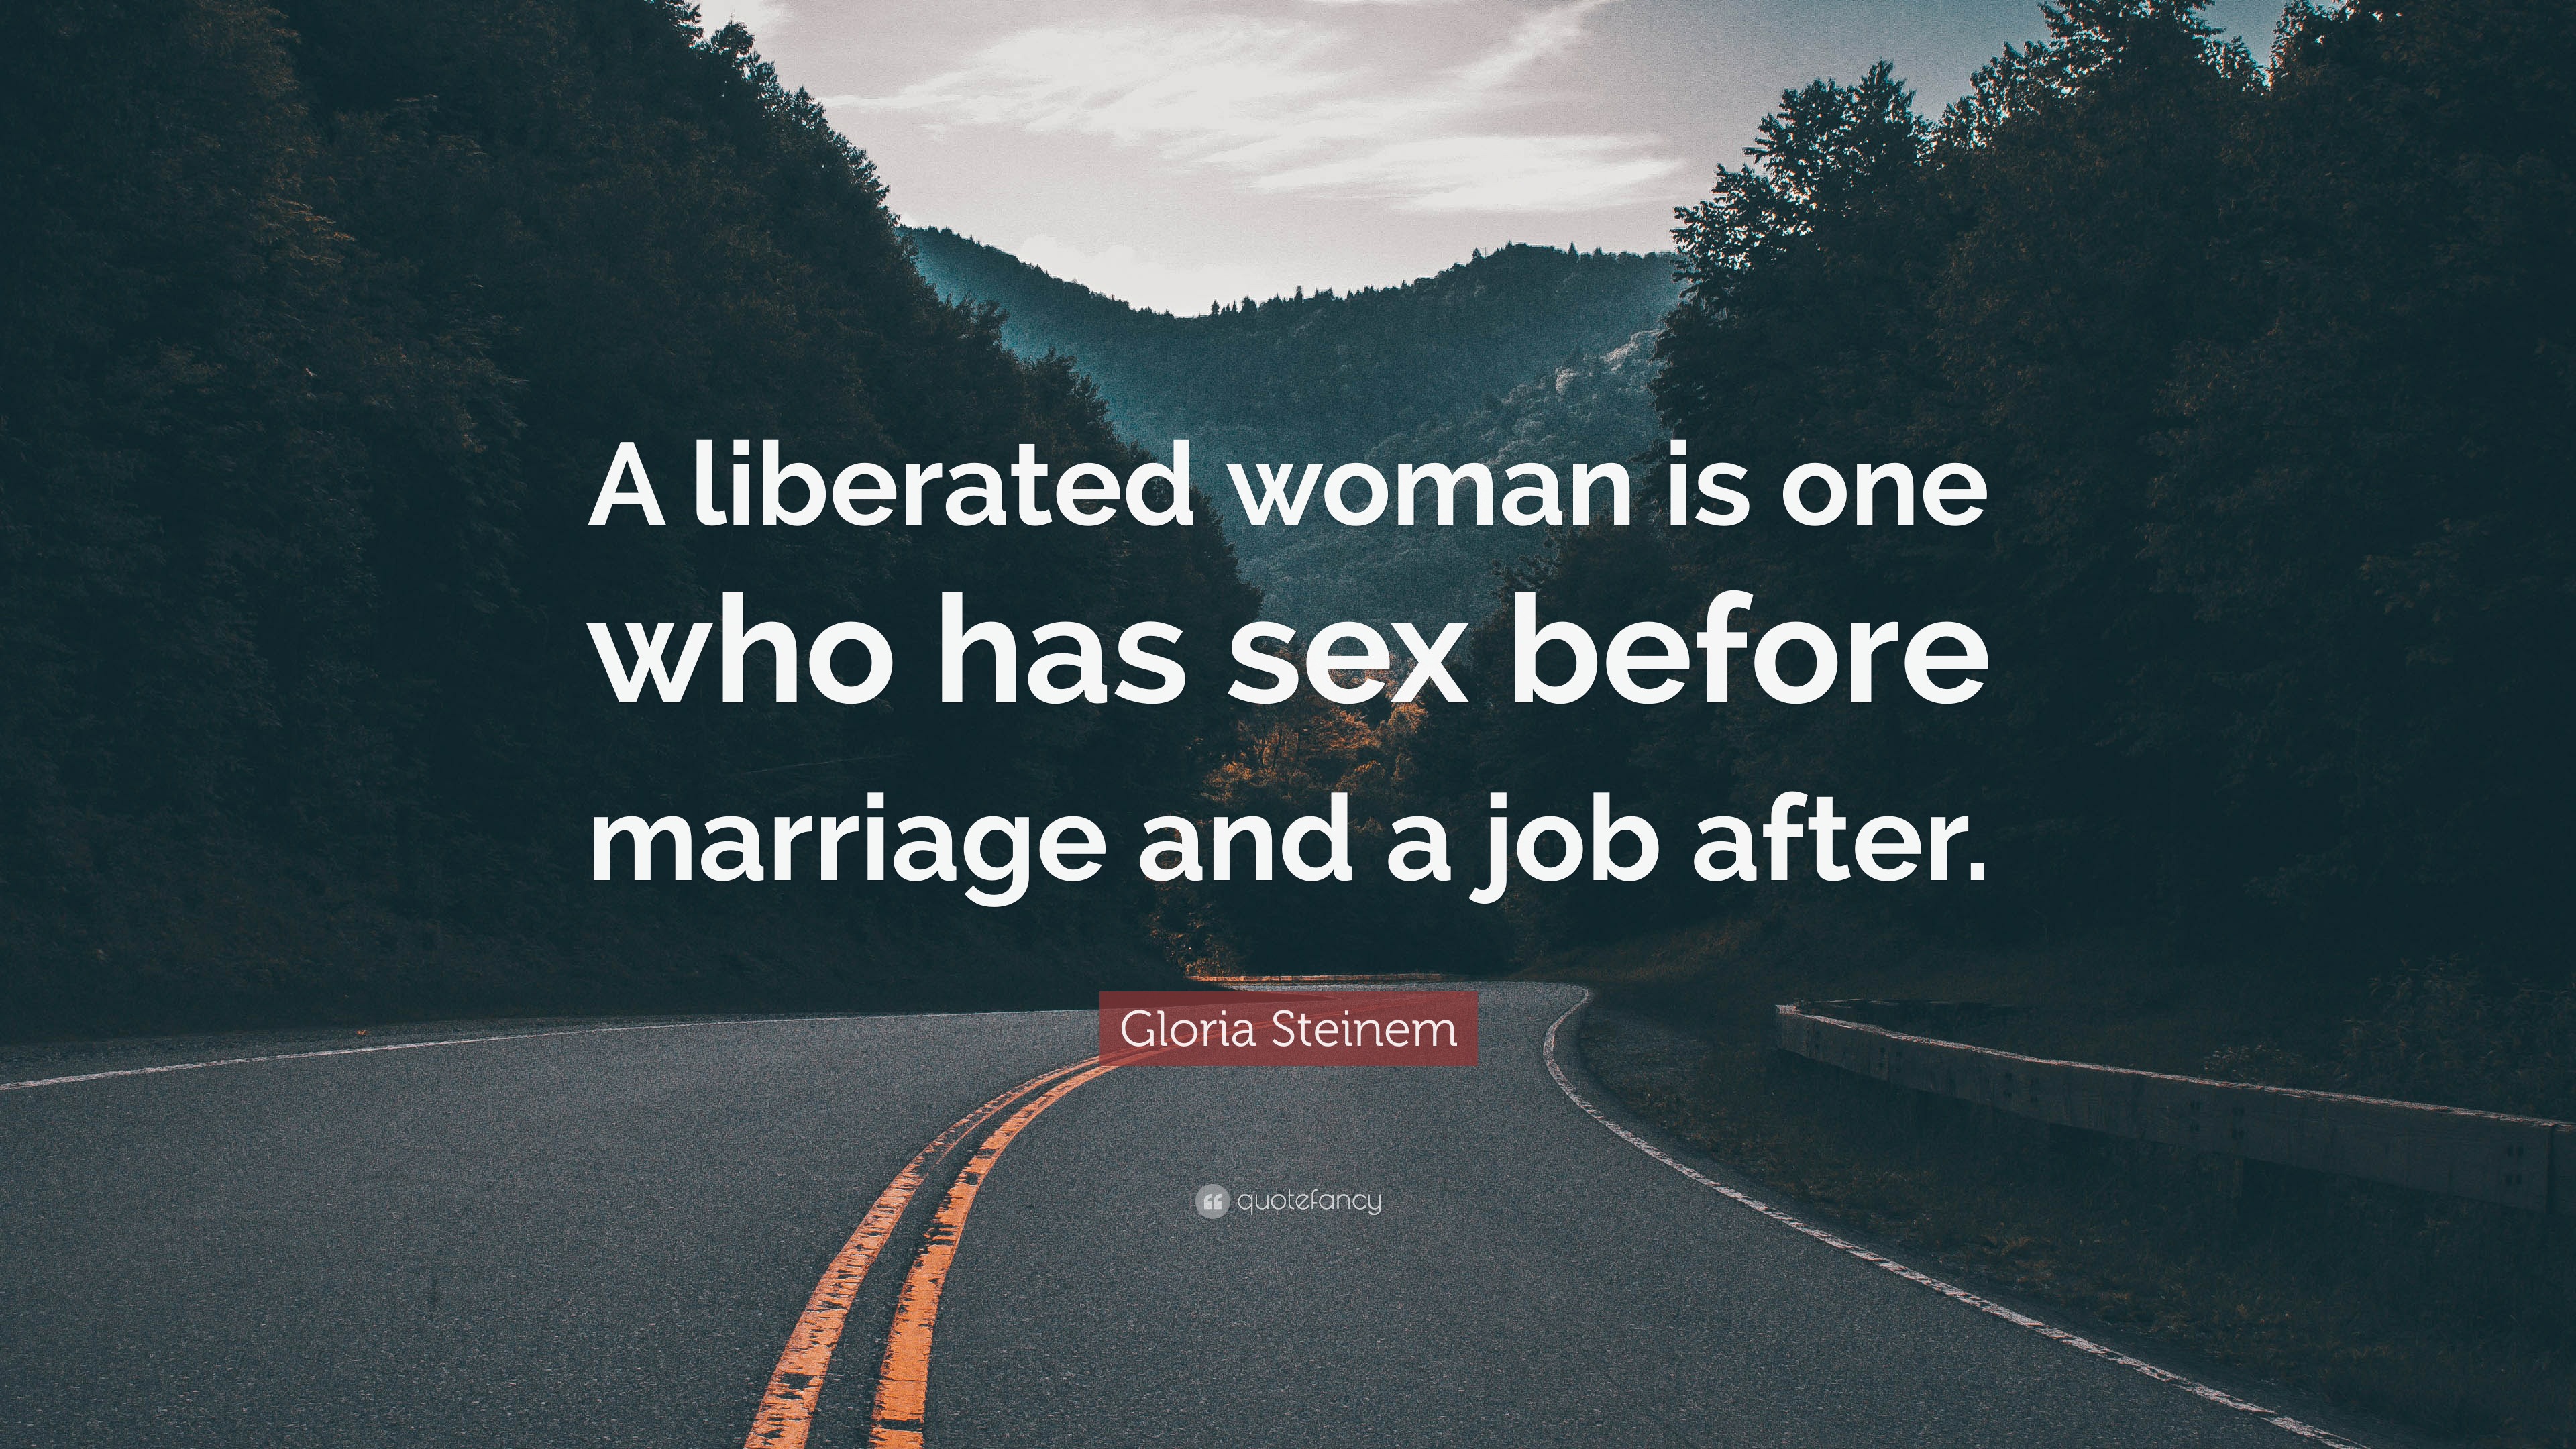 Gloria Steinem Quote “a Liberated Woman Is One Who Has Sex Before Marriage And A Job After” 